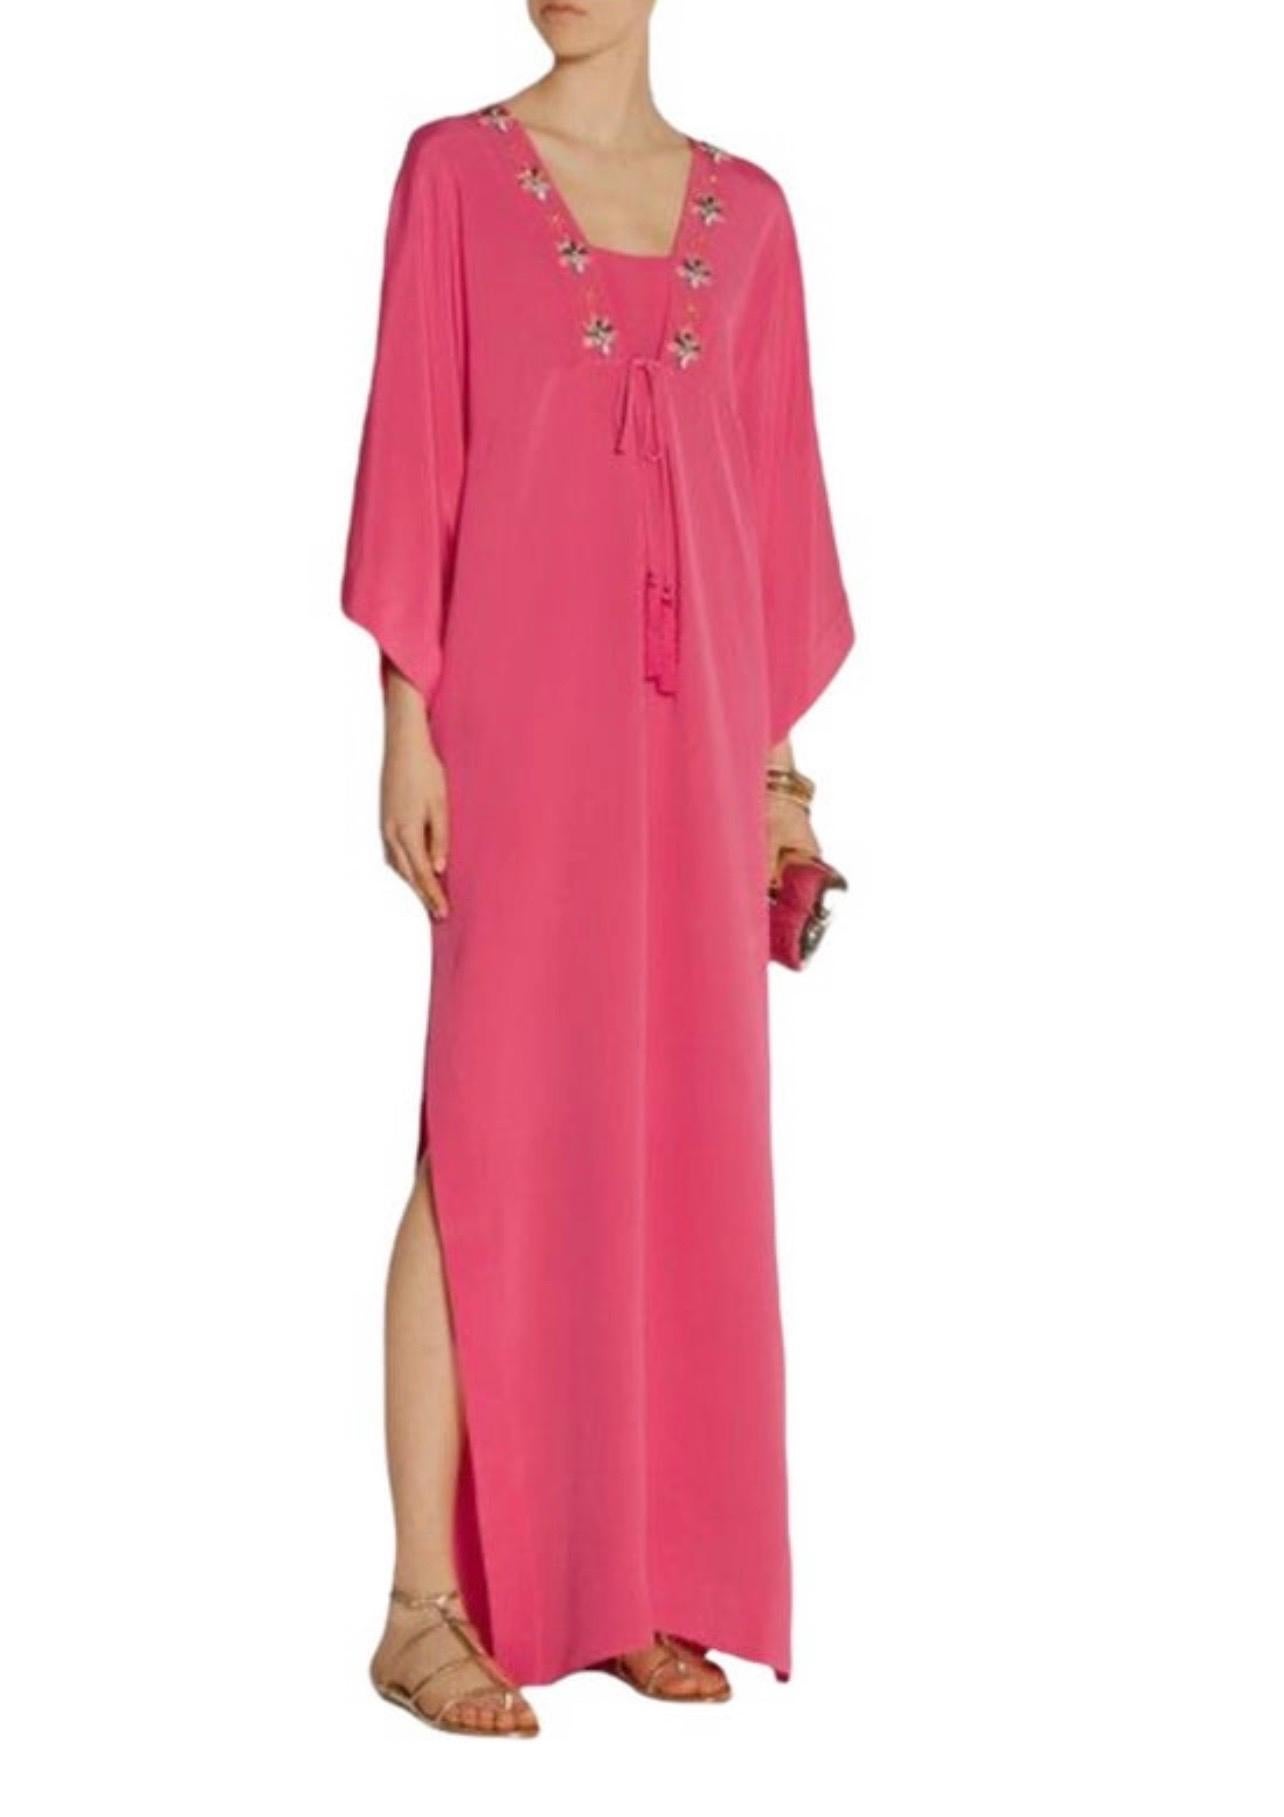 Emilio Pucci's pink kaftan is perfect for chic summer parties. Crafted in Italy from luxurious silk-cady, this
unlined design has a loose fit, tasseled front ties and floral embellishments made from colorful beads and
crystals. Team yours with a